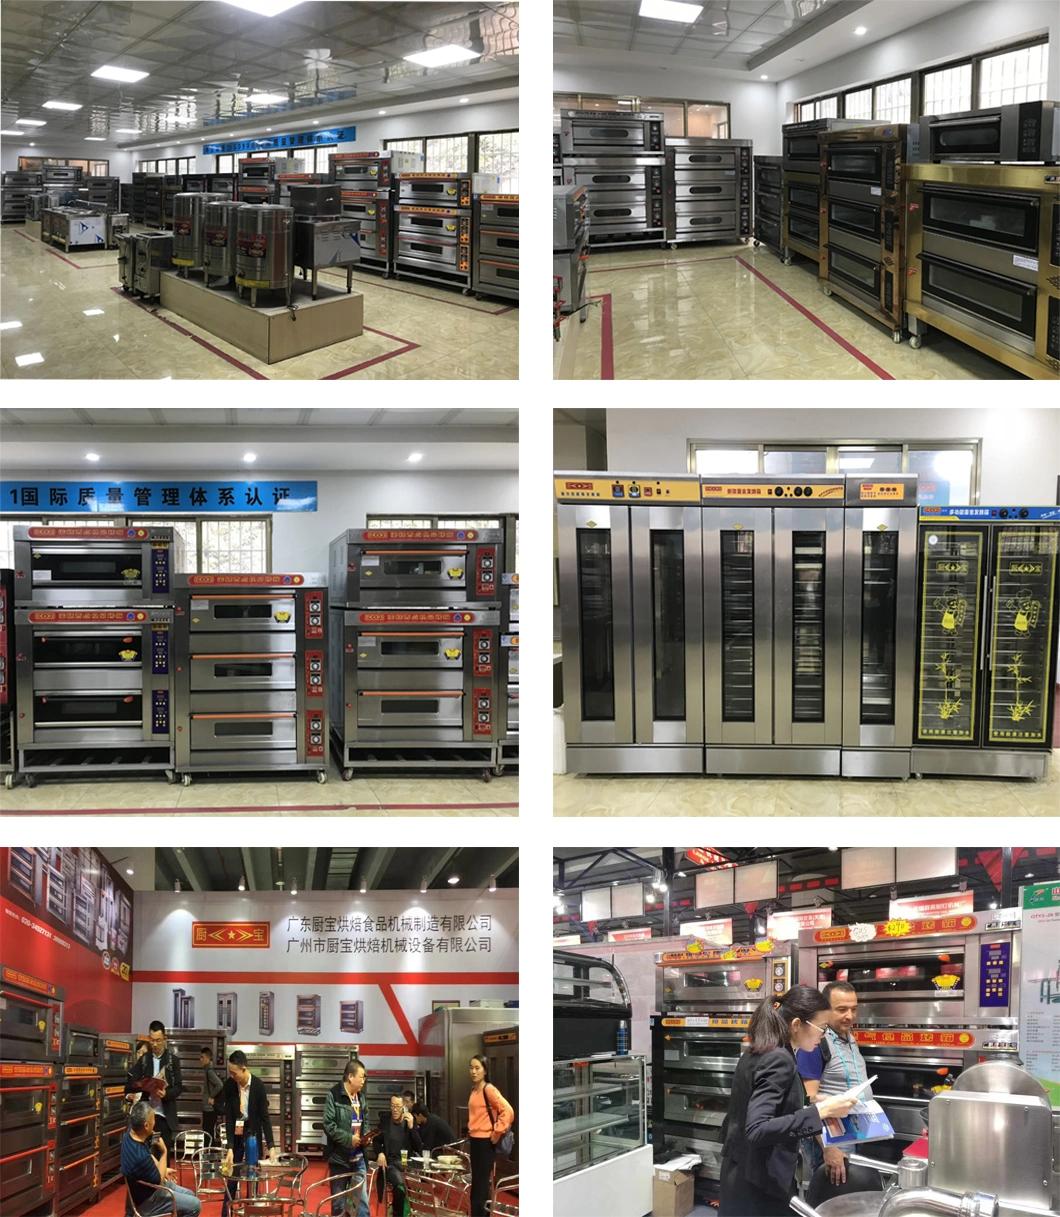 3 Deck 9 Trays Electirc Oven for Commercial Kitchen Baking Equipment Bakery Machine Food Machinery